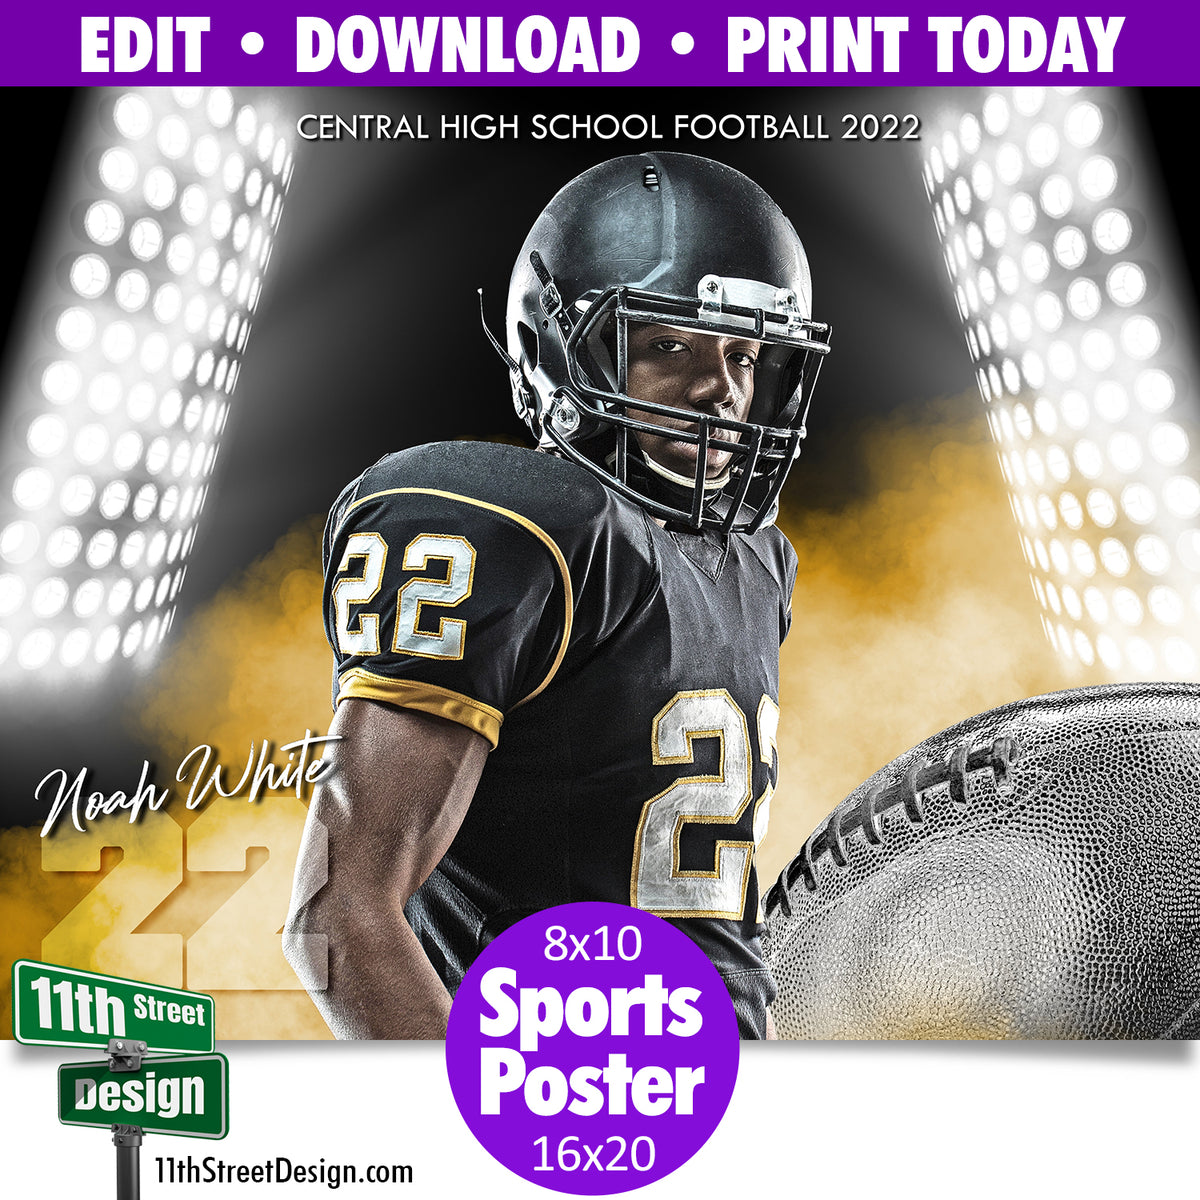 Sports Poster • Edit Now Online • Print Today • Digital Download • Custom Sports Photo • Senior Day Night Poster • Smokey Lights Football Template